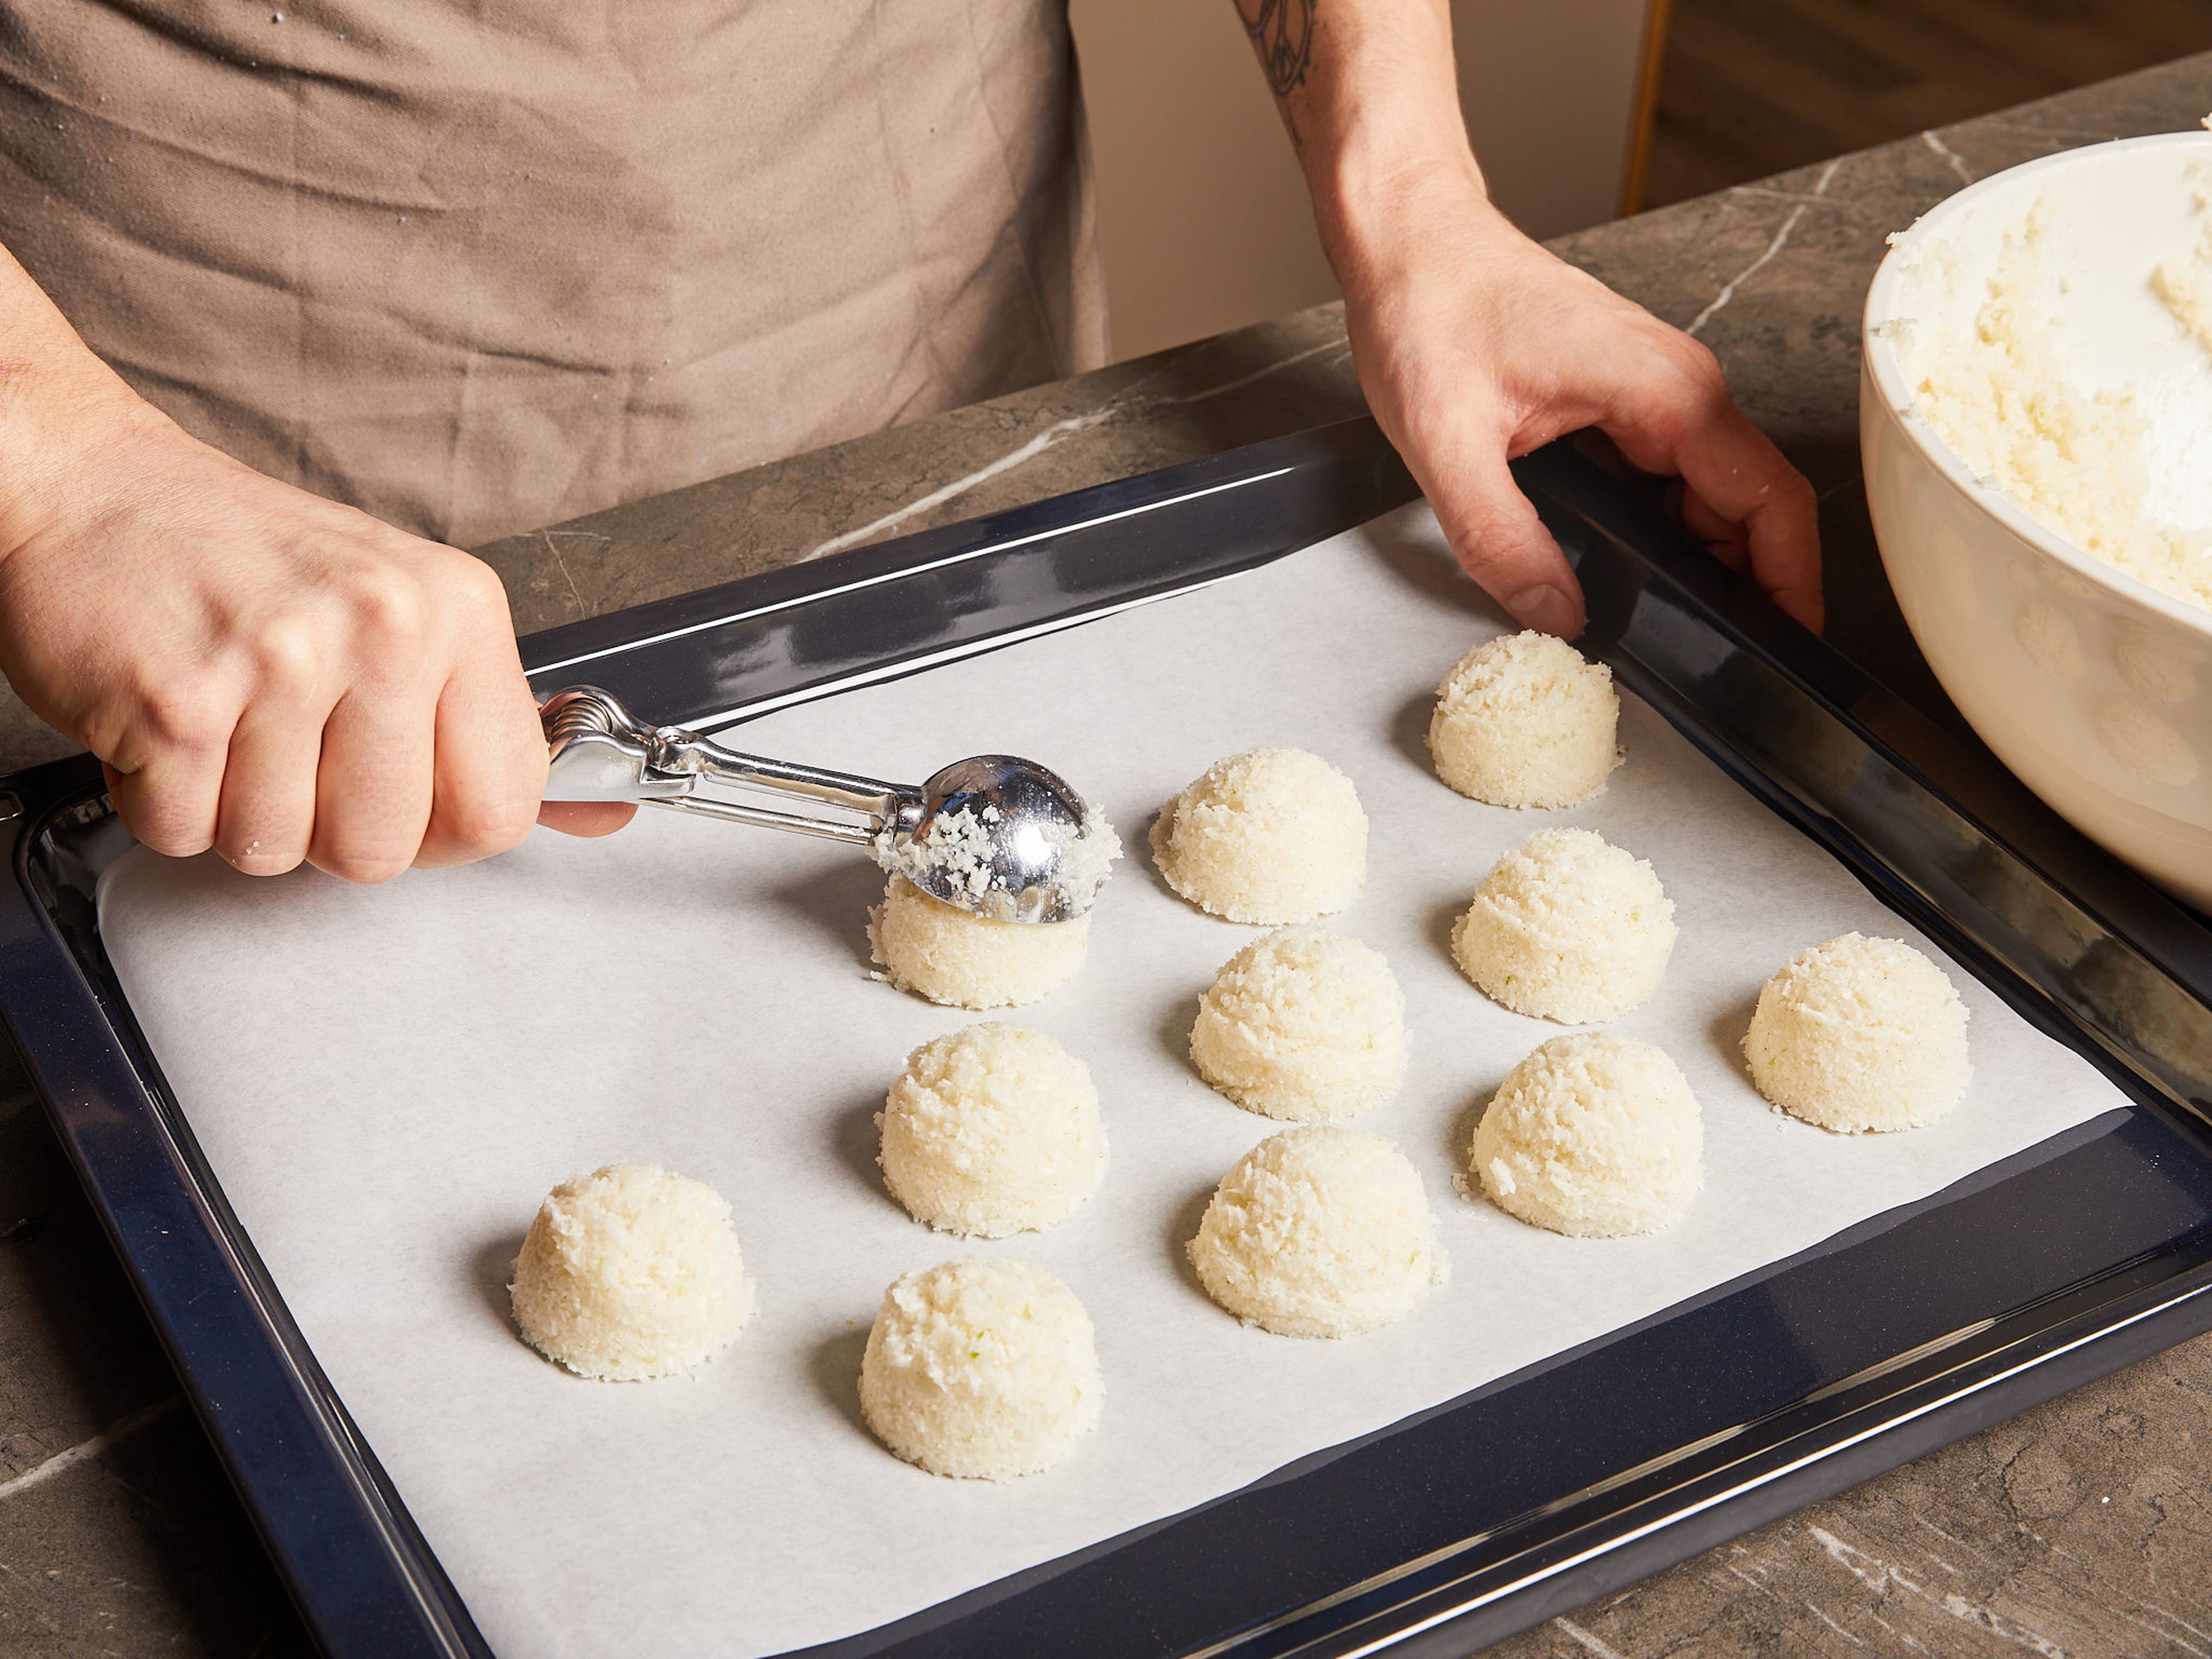 Preheat the oven to 165°C/330°F convection heat (or 185°C/365°F top-bottom heat). Line a baking sheet with parchment paper. Use an ice cream scoop or spoon to lightly shape the coconut mixture into 20 small cones and place on the baking tray. Transfer to the oven and bake on the middle rack for approx. 10–15 min. The macaroons should be lightly browned but still a little soft. Remove from the oven and leave to cool completely. Only then carefully remove from the parchment paper.